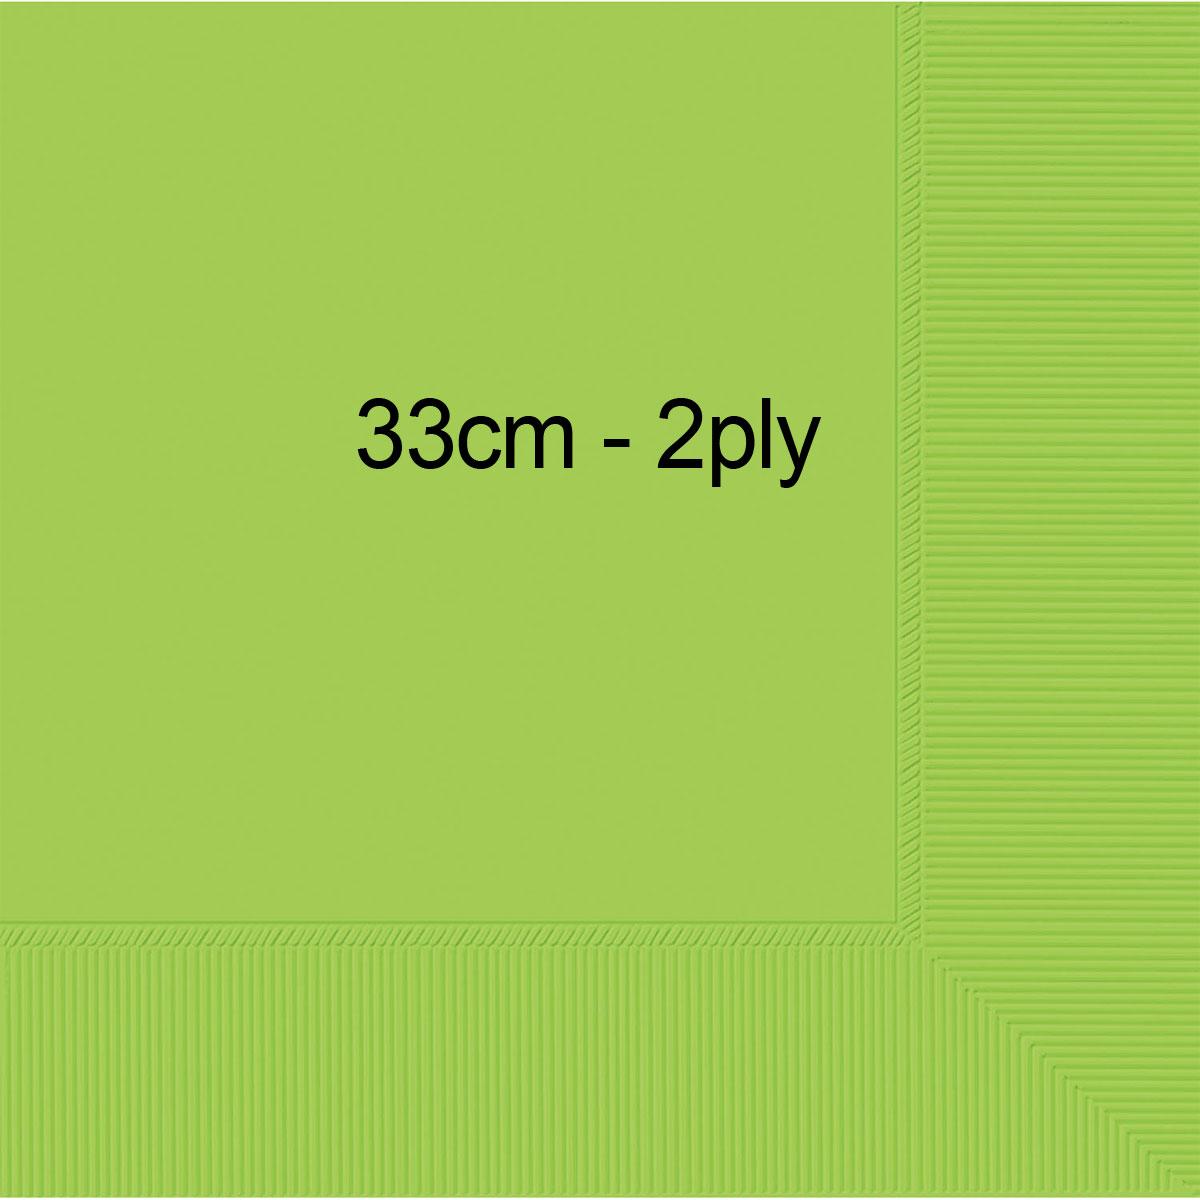 Kiwi Green Luncheon Napkins - 2ply 33cm pkt20 by Amscan 51220-53 and available here at Karnival Costumes online party shop